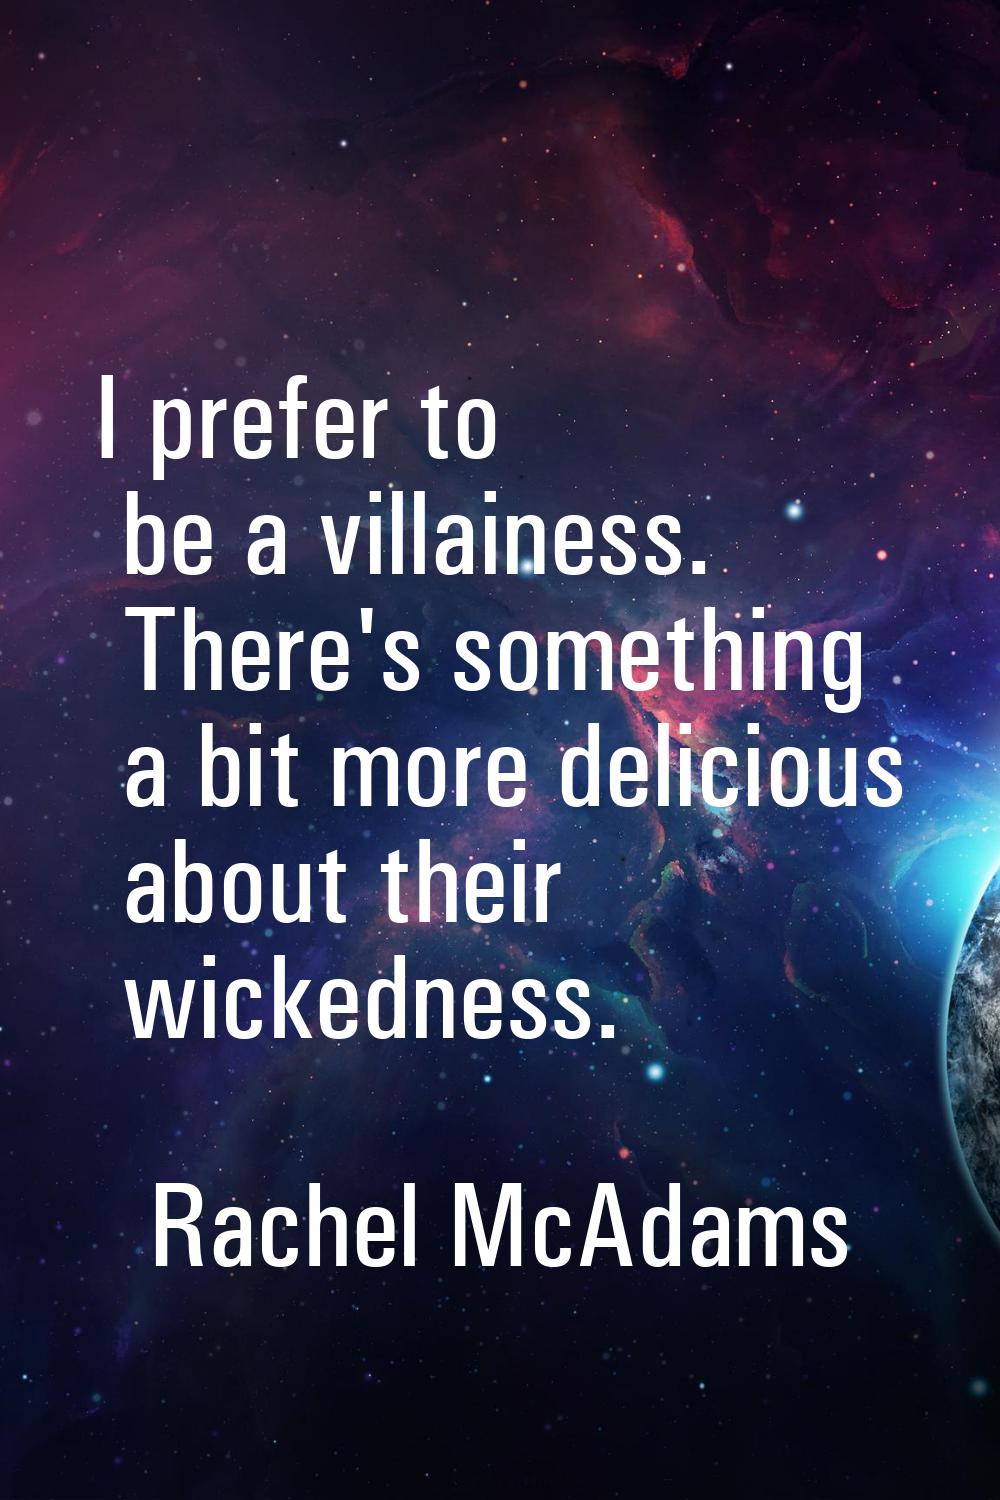 I prefer to be a villainess. There's something a bit more delicious about their wickedness.